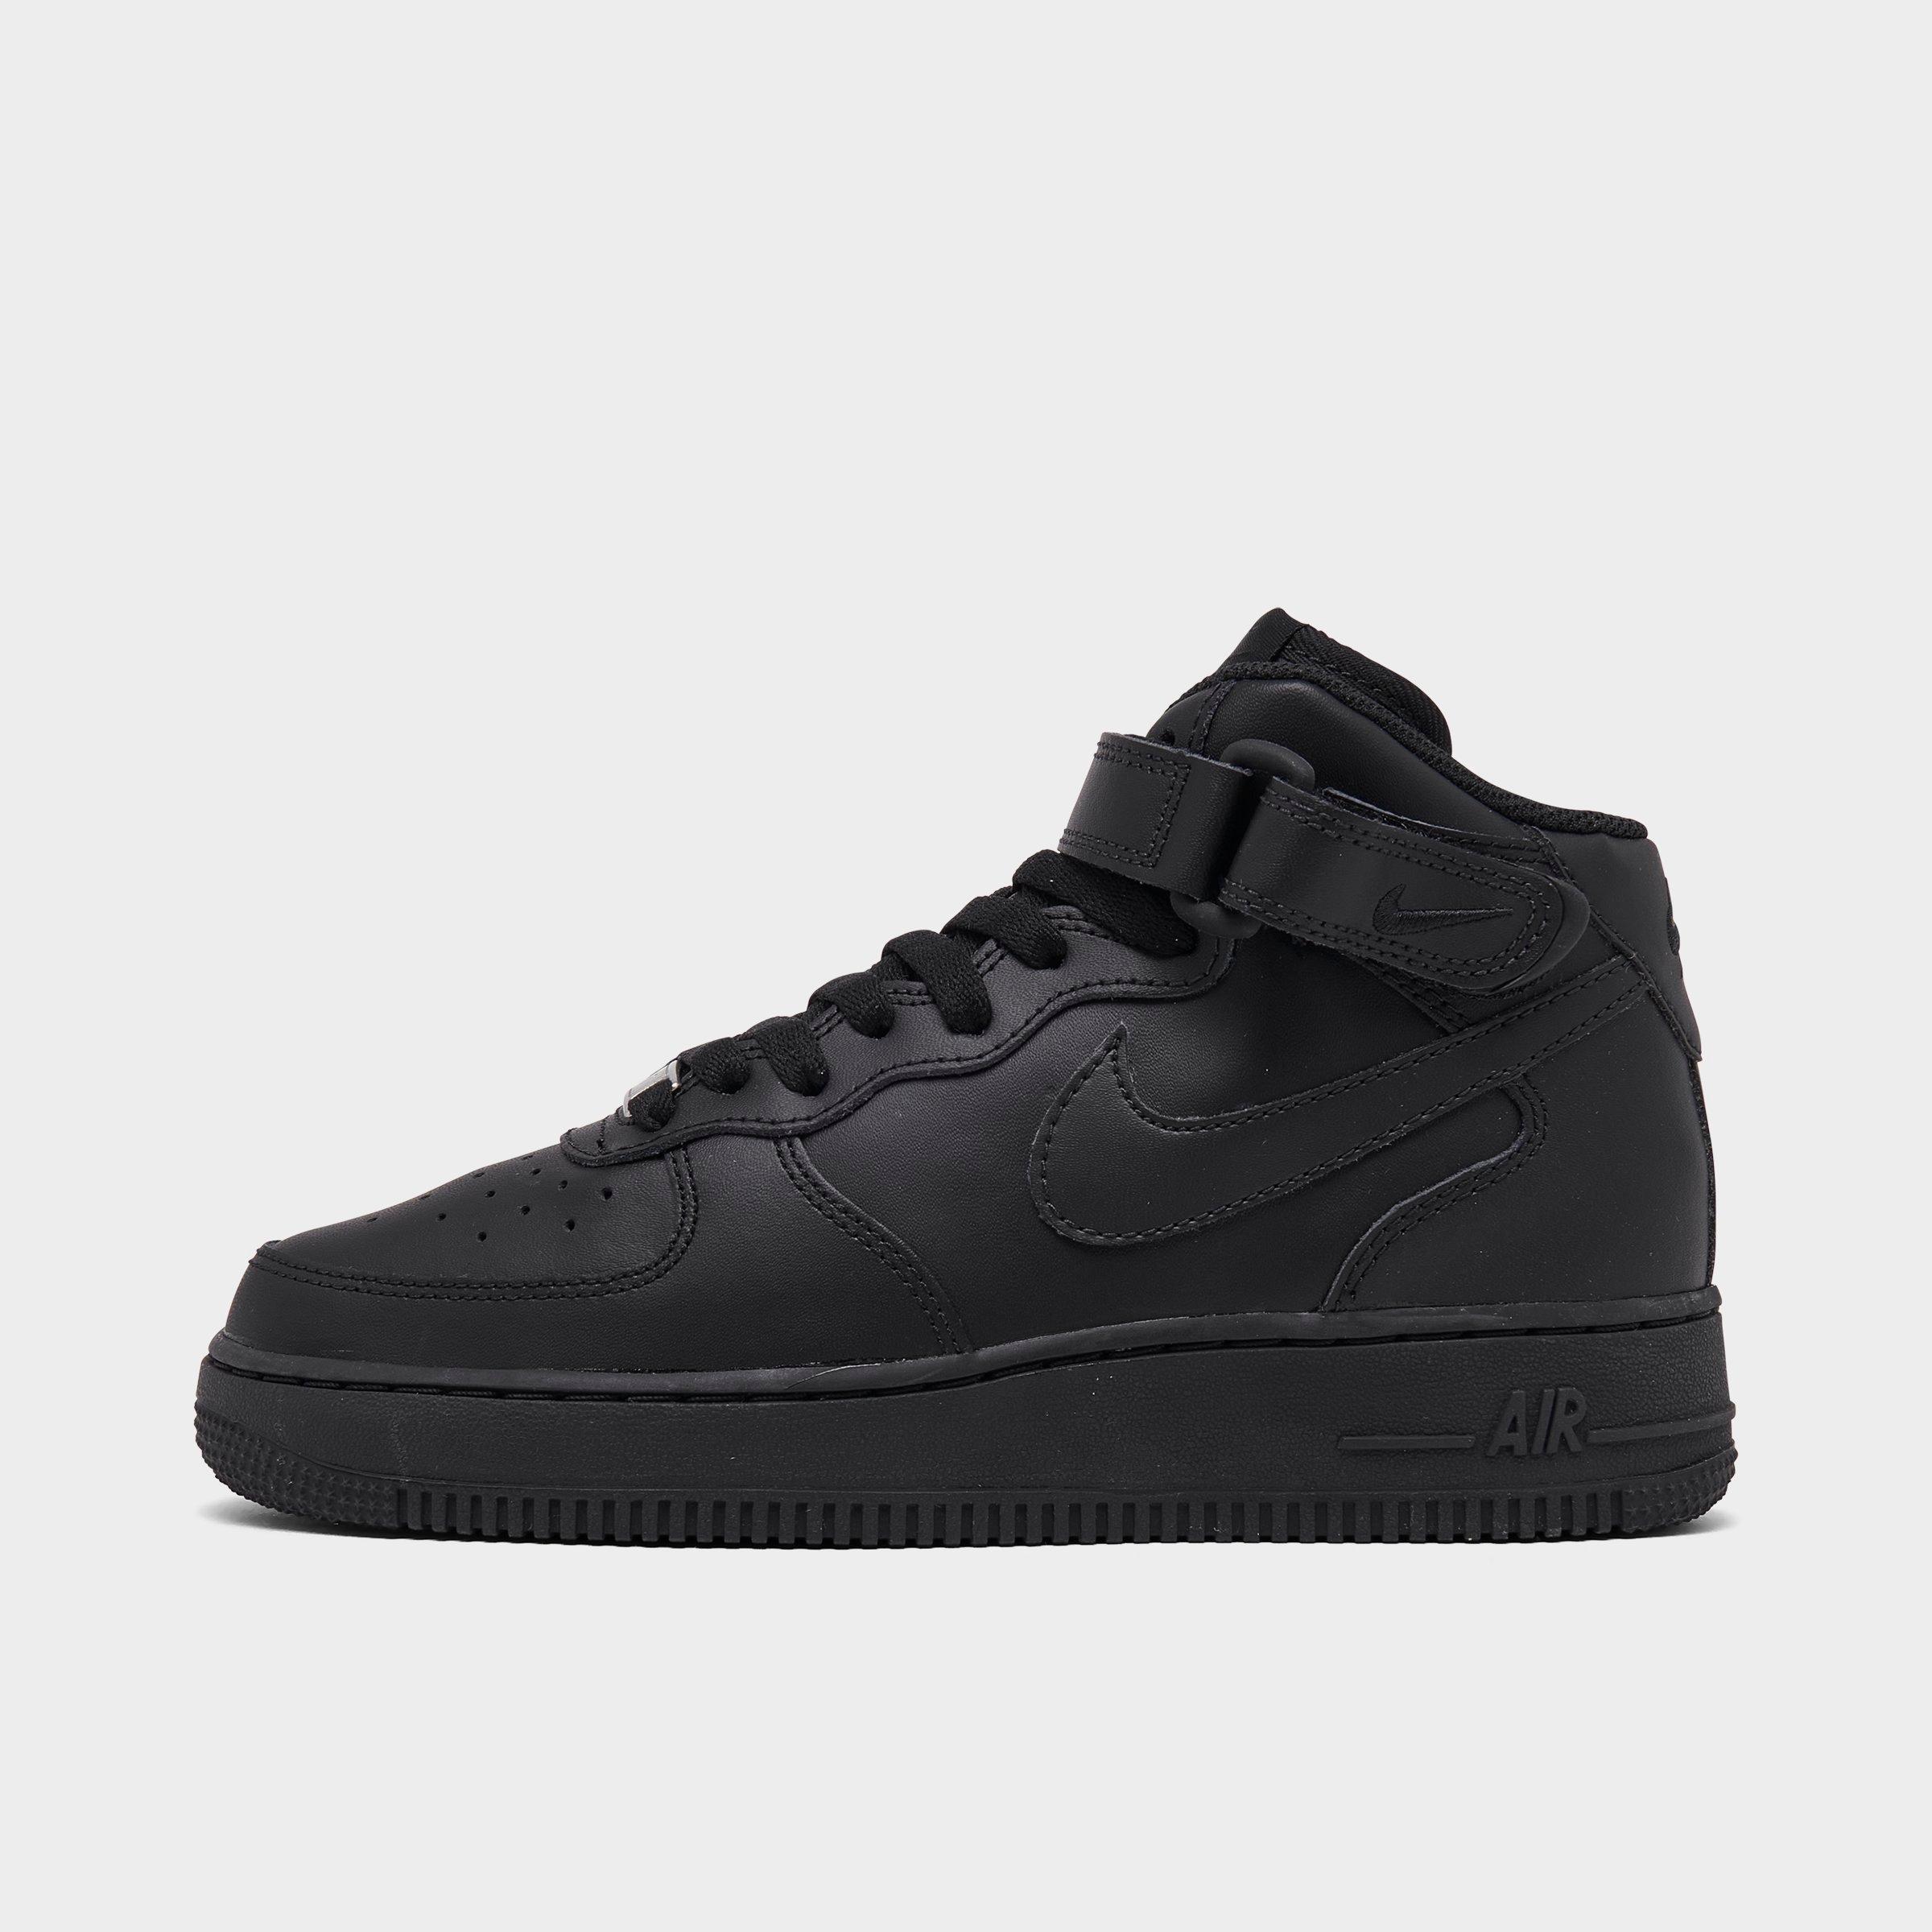 NIKE NIKE BIG KIDS' AIR FORCE 1 MID '07 LE CASUAL SHOES,3002080